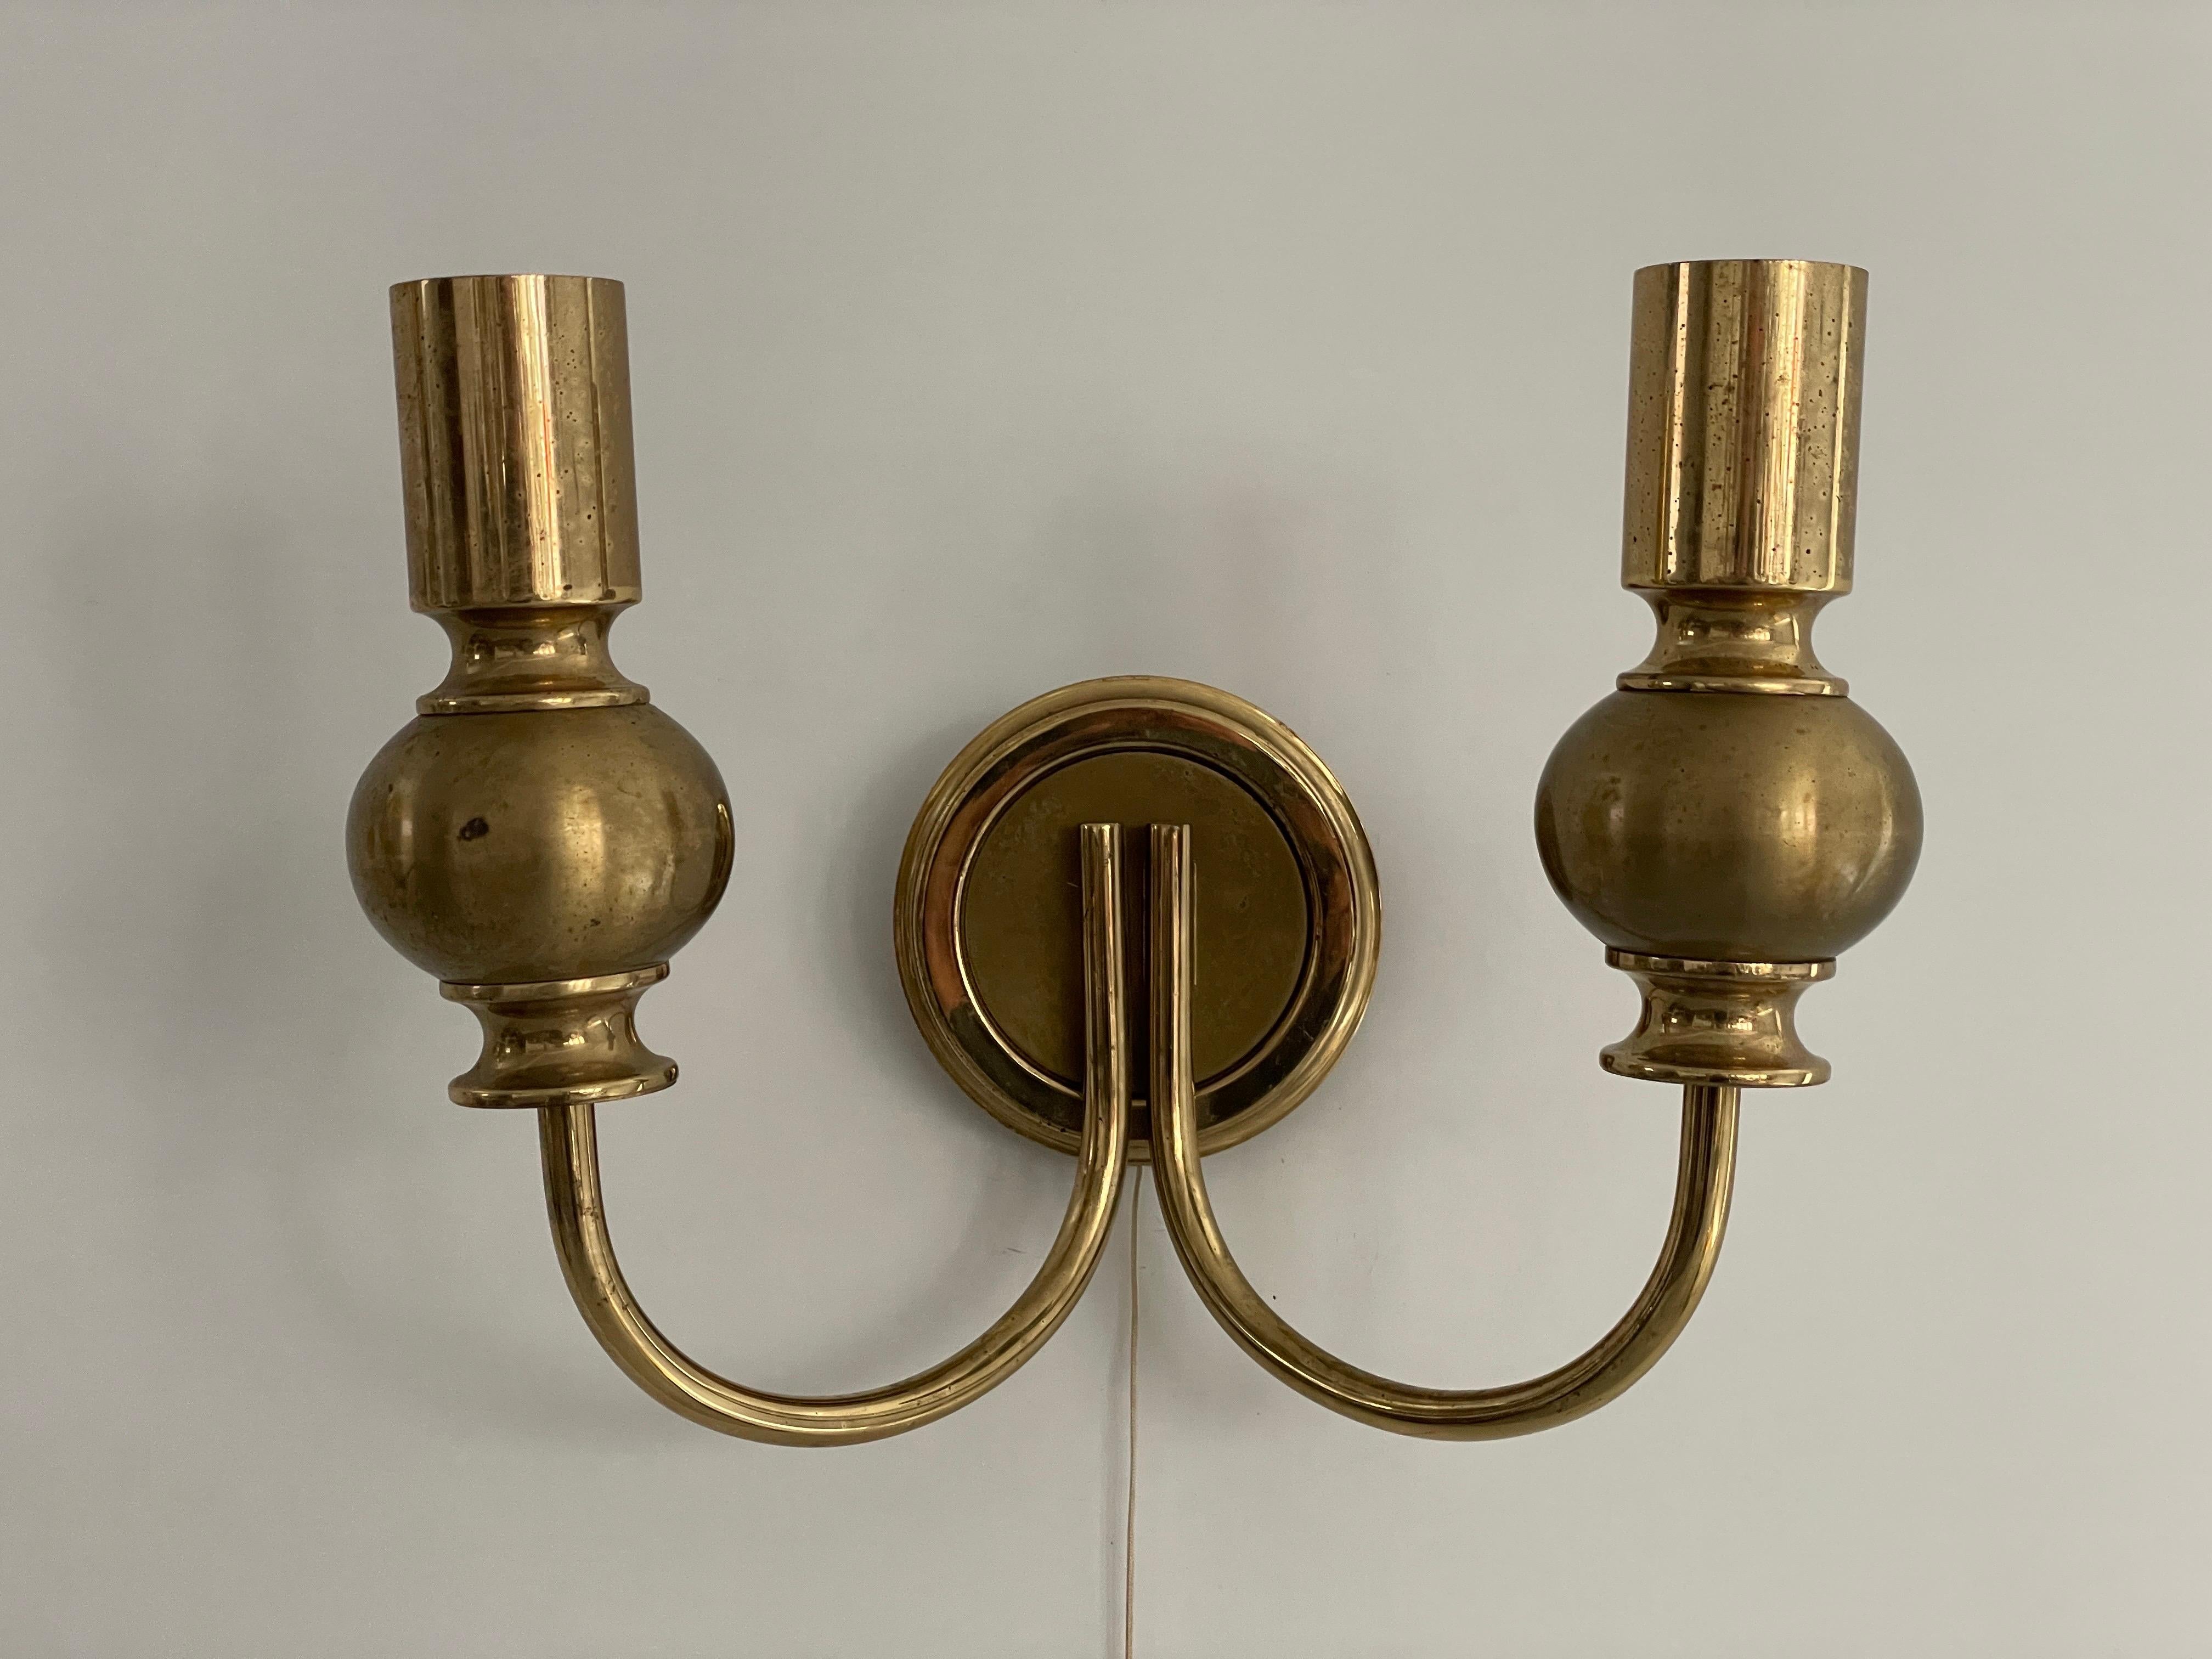 Atomic Design Brass Pair of Sconces by N Leuchten, 1950s, Germany For Sale 1